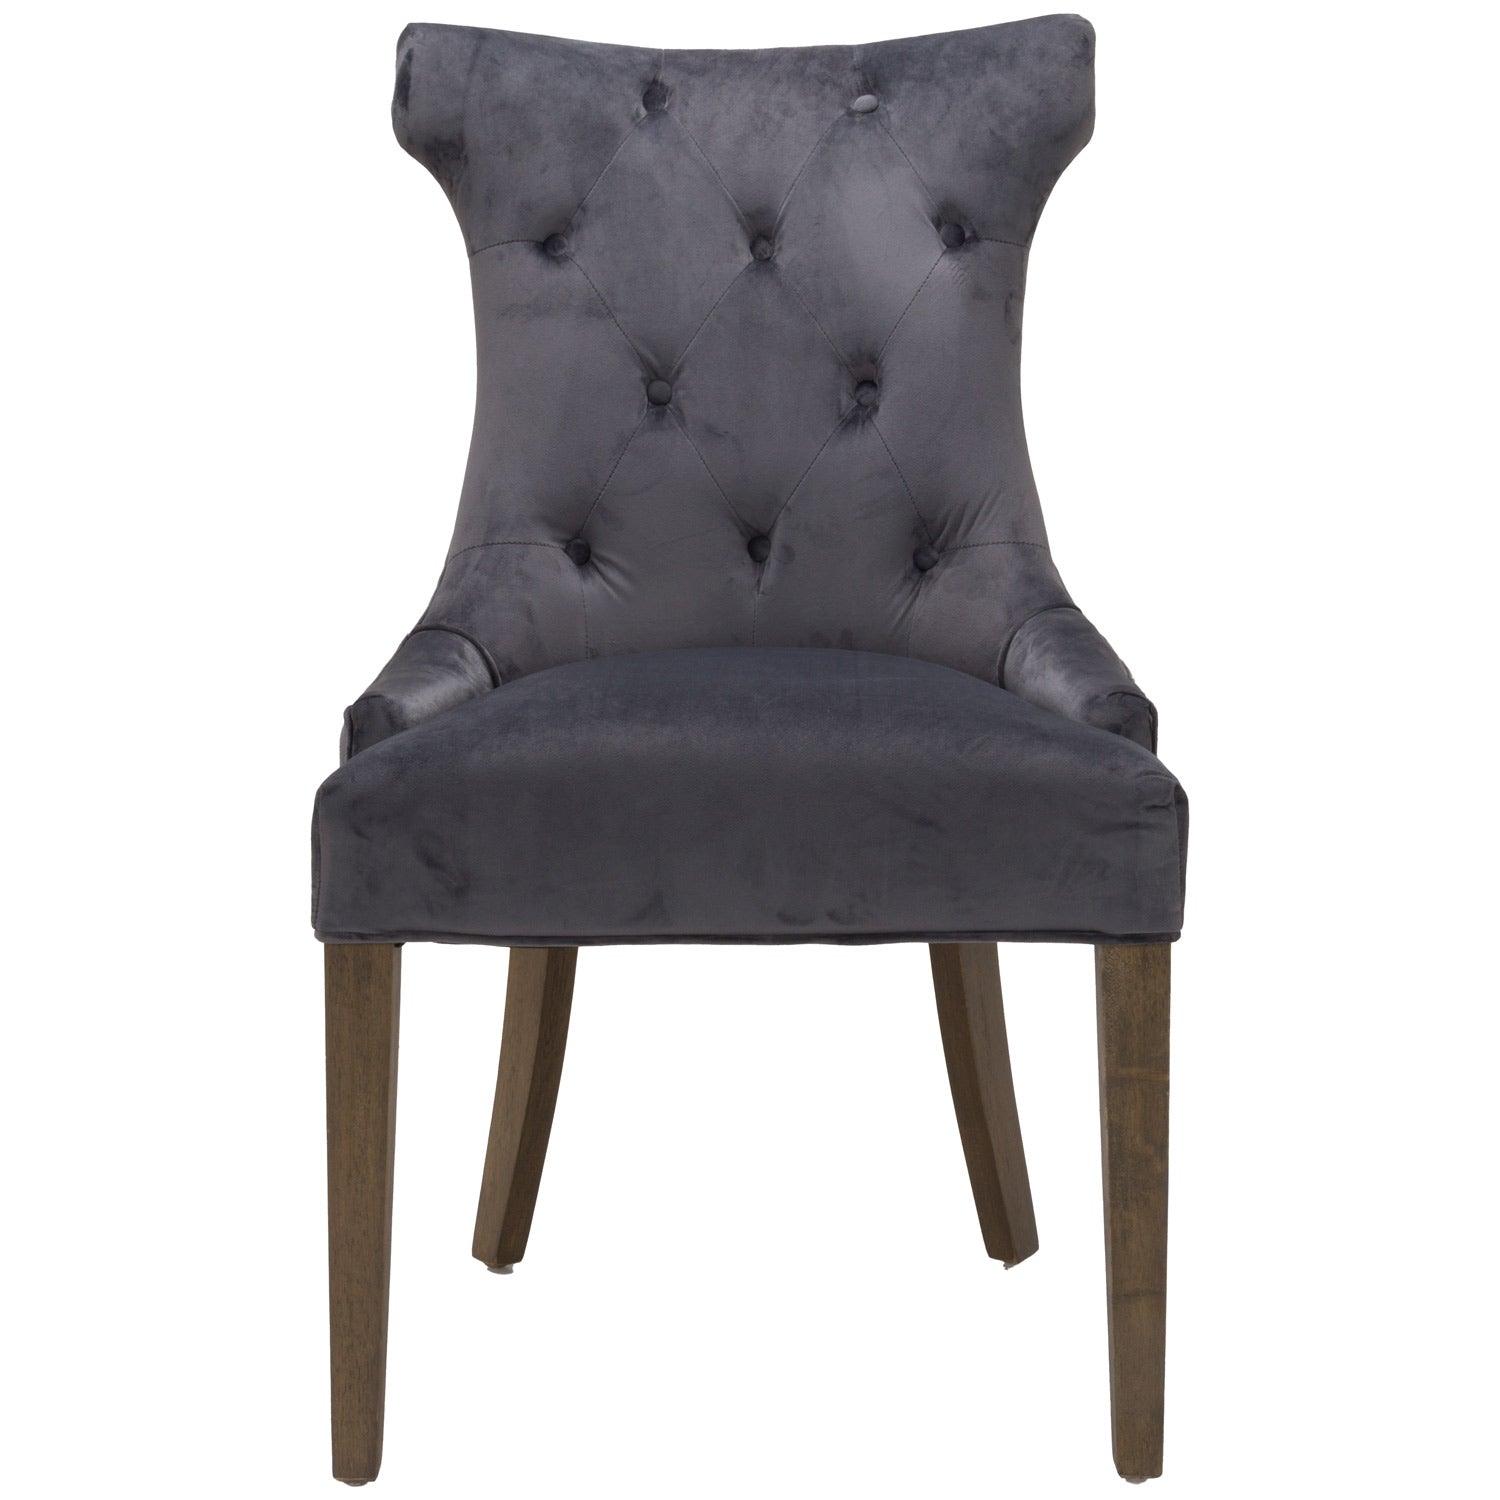 Knightsbridge High Wing Ring Backed Dining Chair - Vookoo Lifestyle